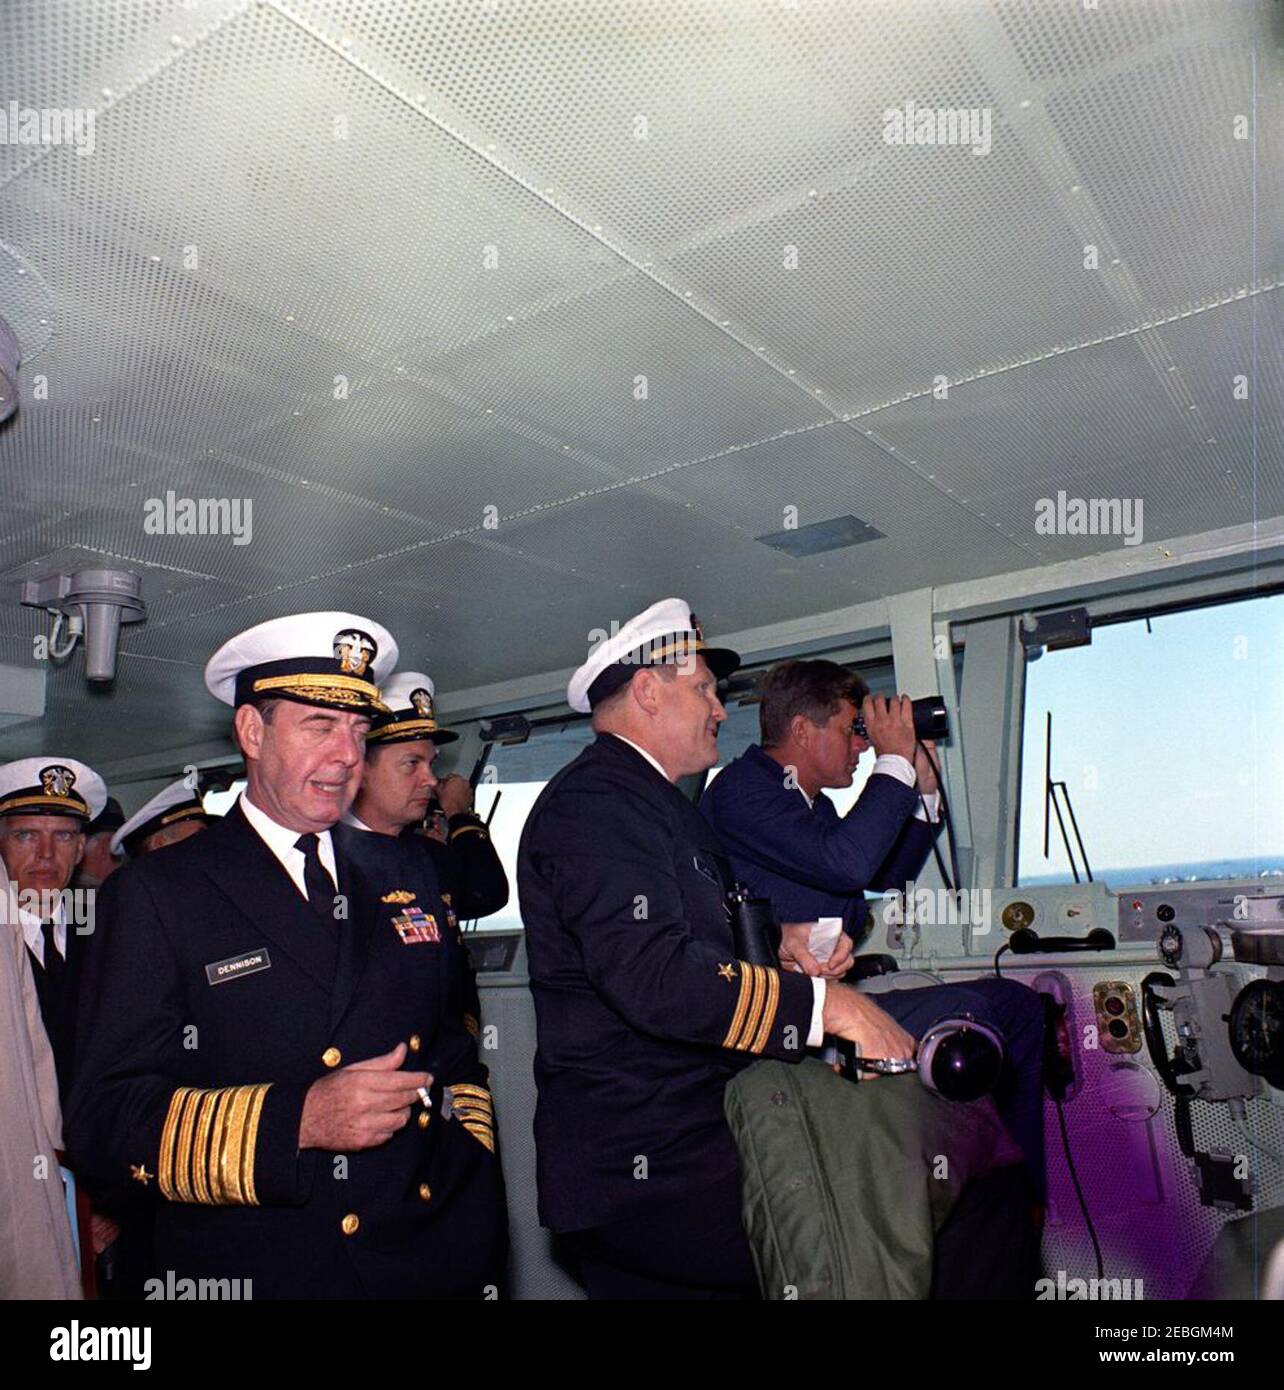 Visit to the Atlantic Fleet: President Kennedy views fleet demonstration aboard USS Enterprise. President John F. Kennedy (looking through binoculars) watches U.S. Atlantic Fleet sea and air power demonstrations from the captainu0027s chair on the bridge of the aircraft carrier USS Enterprise, at sea off the coast of North Carolina. Commander Harold F. Lang, USS Enterprise Operations Officer (in profile), stands left of President Kennedy; Admiral Robert L. Dennison, Commander in Chief of the Atlantic Command (CINCLANT), Commander in Chief of the U.S. Atlantic Fleet, and Supreme Allied Command Stock Photo